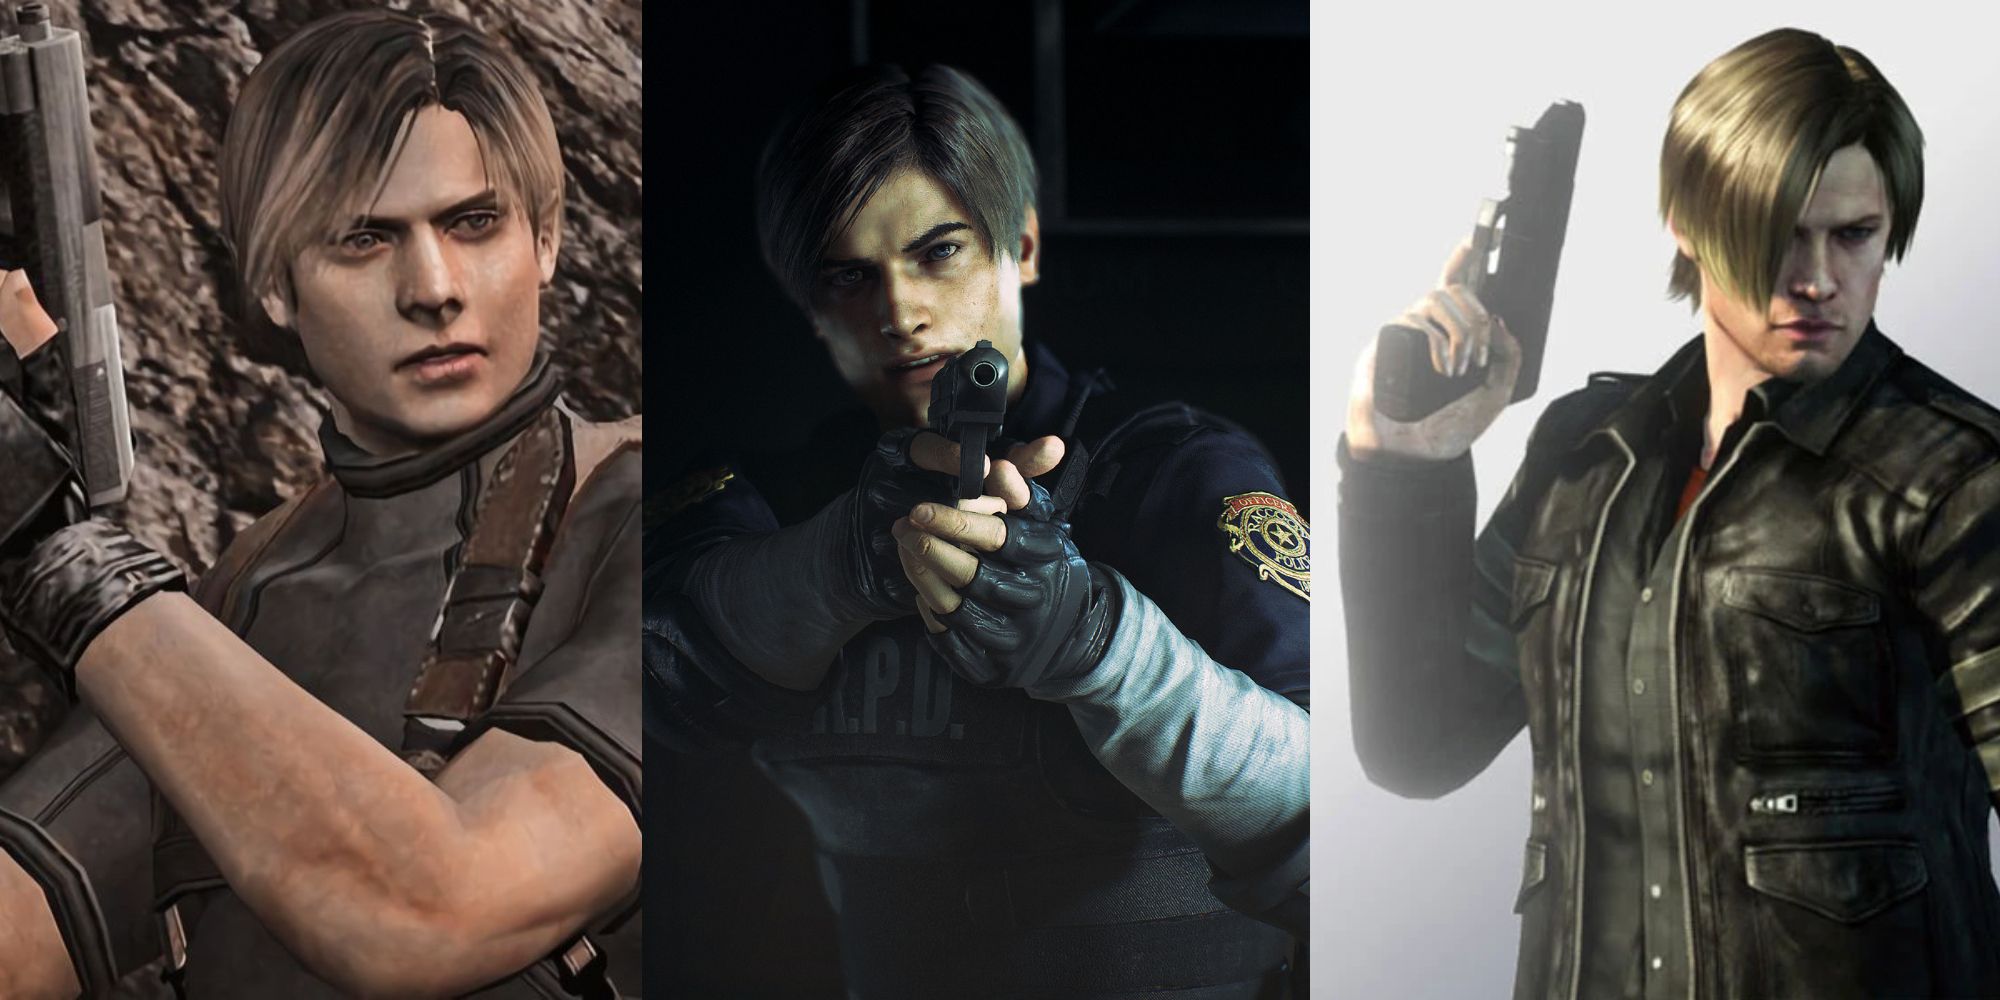 Leon as shown in the three different games he stars in: 4, 2 and 6